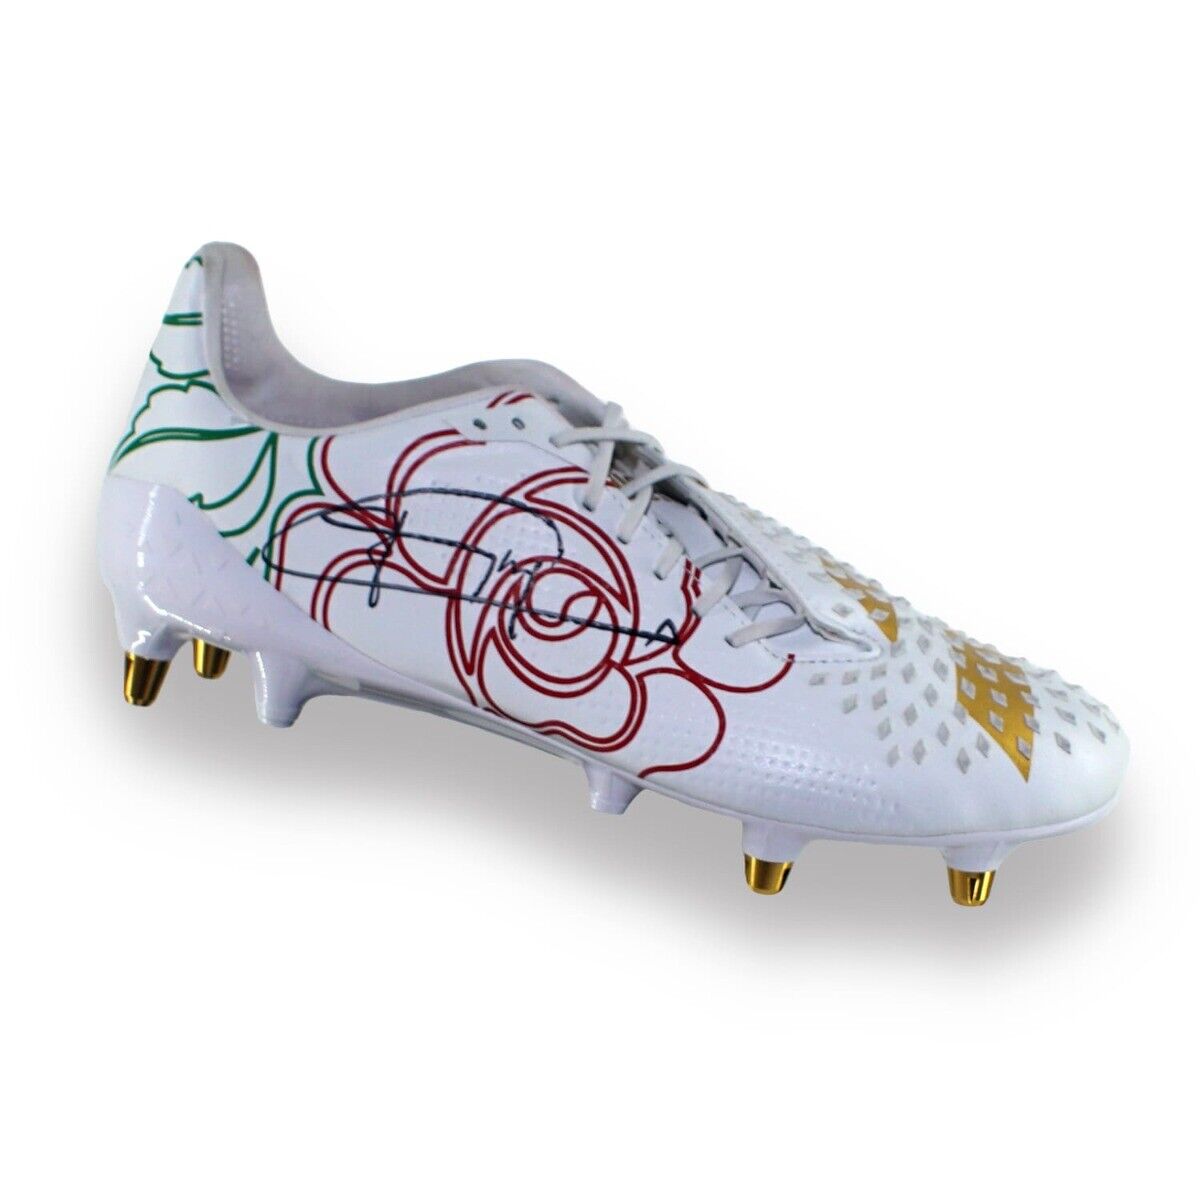 Jonny Wilkinson Signed England Rugby Shoe- The Rose